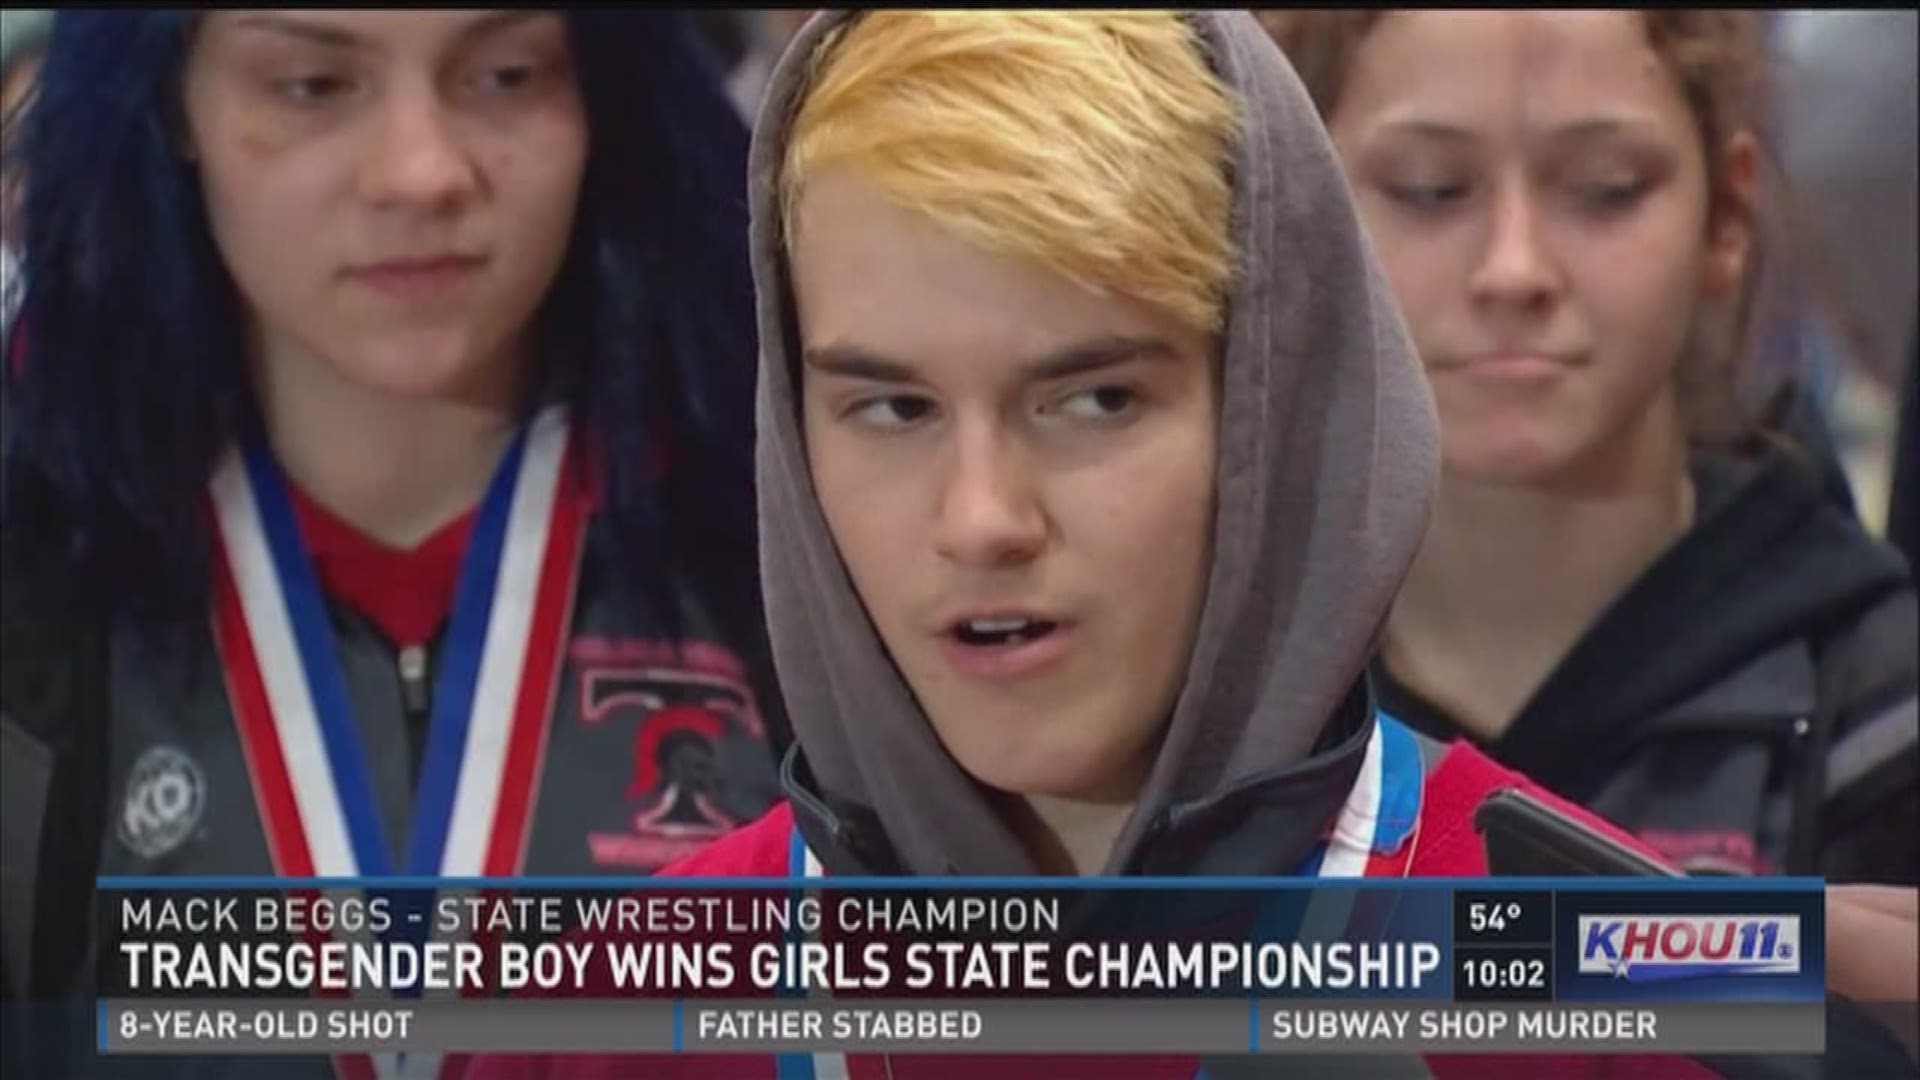 CYPRESS, Texas- Mack Beggs, a transgender teen who identifies as male, won the Texas girls state wrestling title on Saturday. 